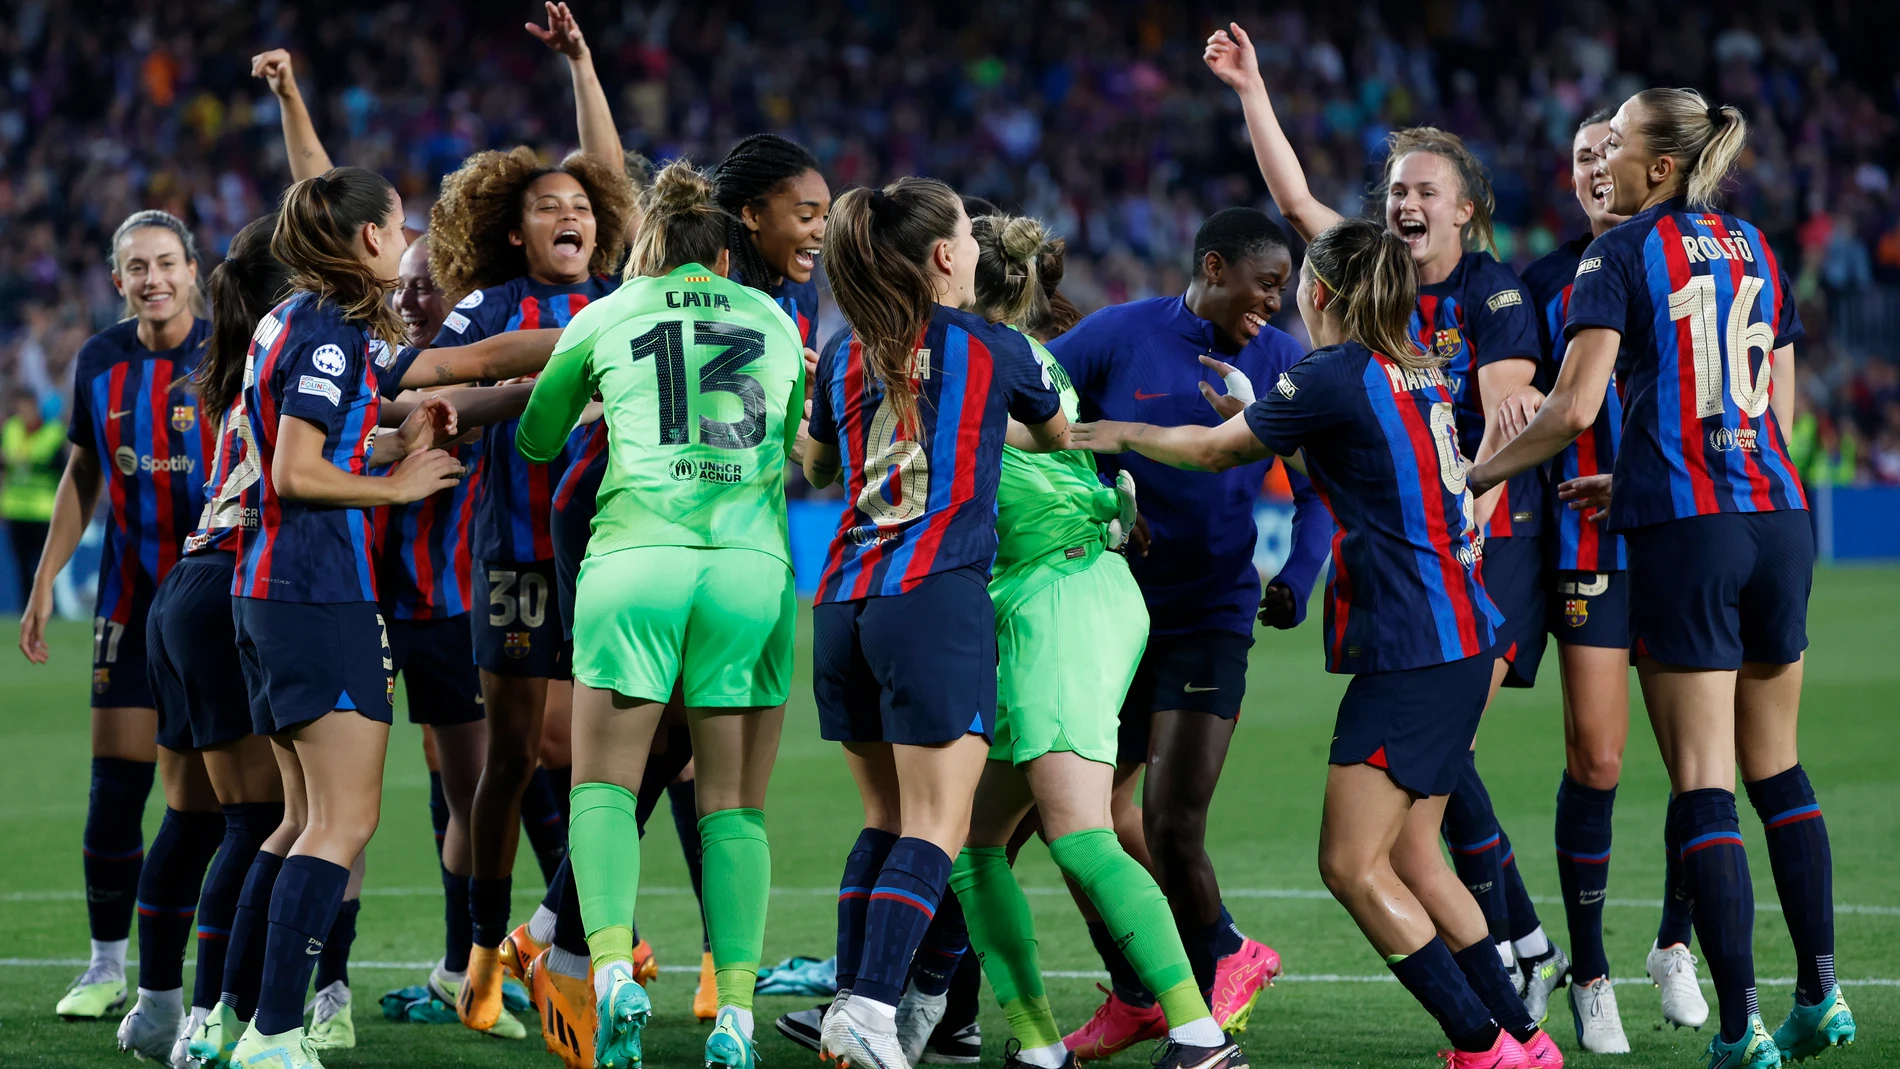 Barcelona players celebrate at the end of the Women's Champions League semifinal, second leg, soccer match between FC Barcelona and Chelsea FC at the Camp Nou stadium in Barcelona, Spain, Thursday, April 27, 2023. The match ended in a 1-1 draw but Barcelona advance on a 2-1 aggregate. (AP Photo/Joan Monfort)